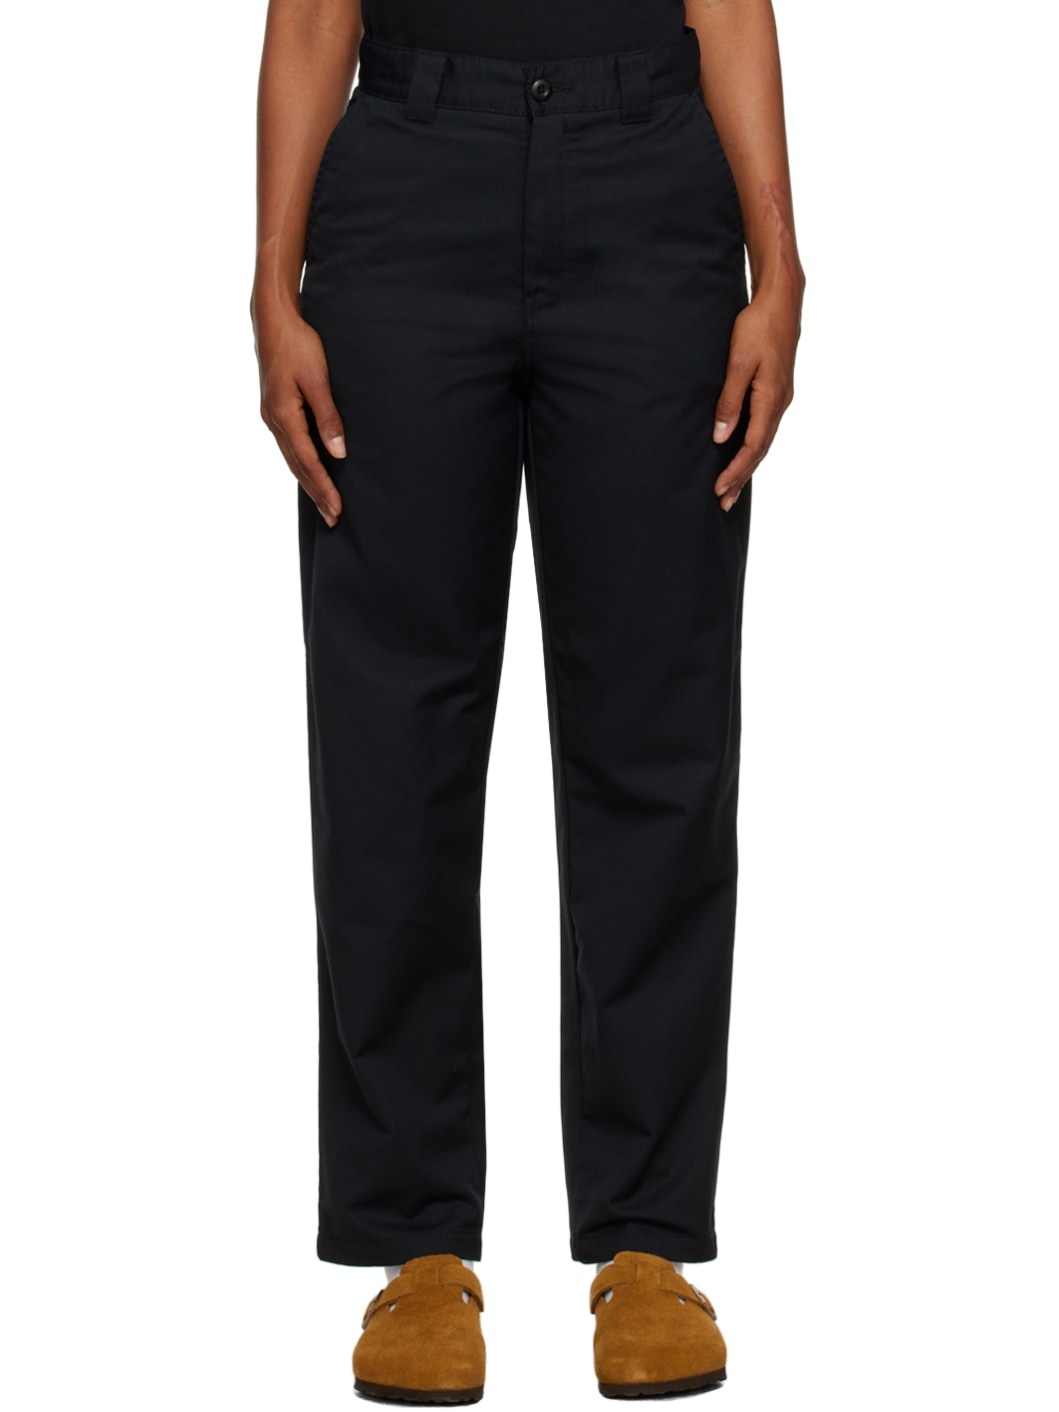 Black Master Trousers - 1